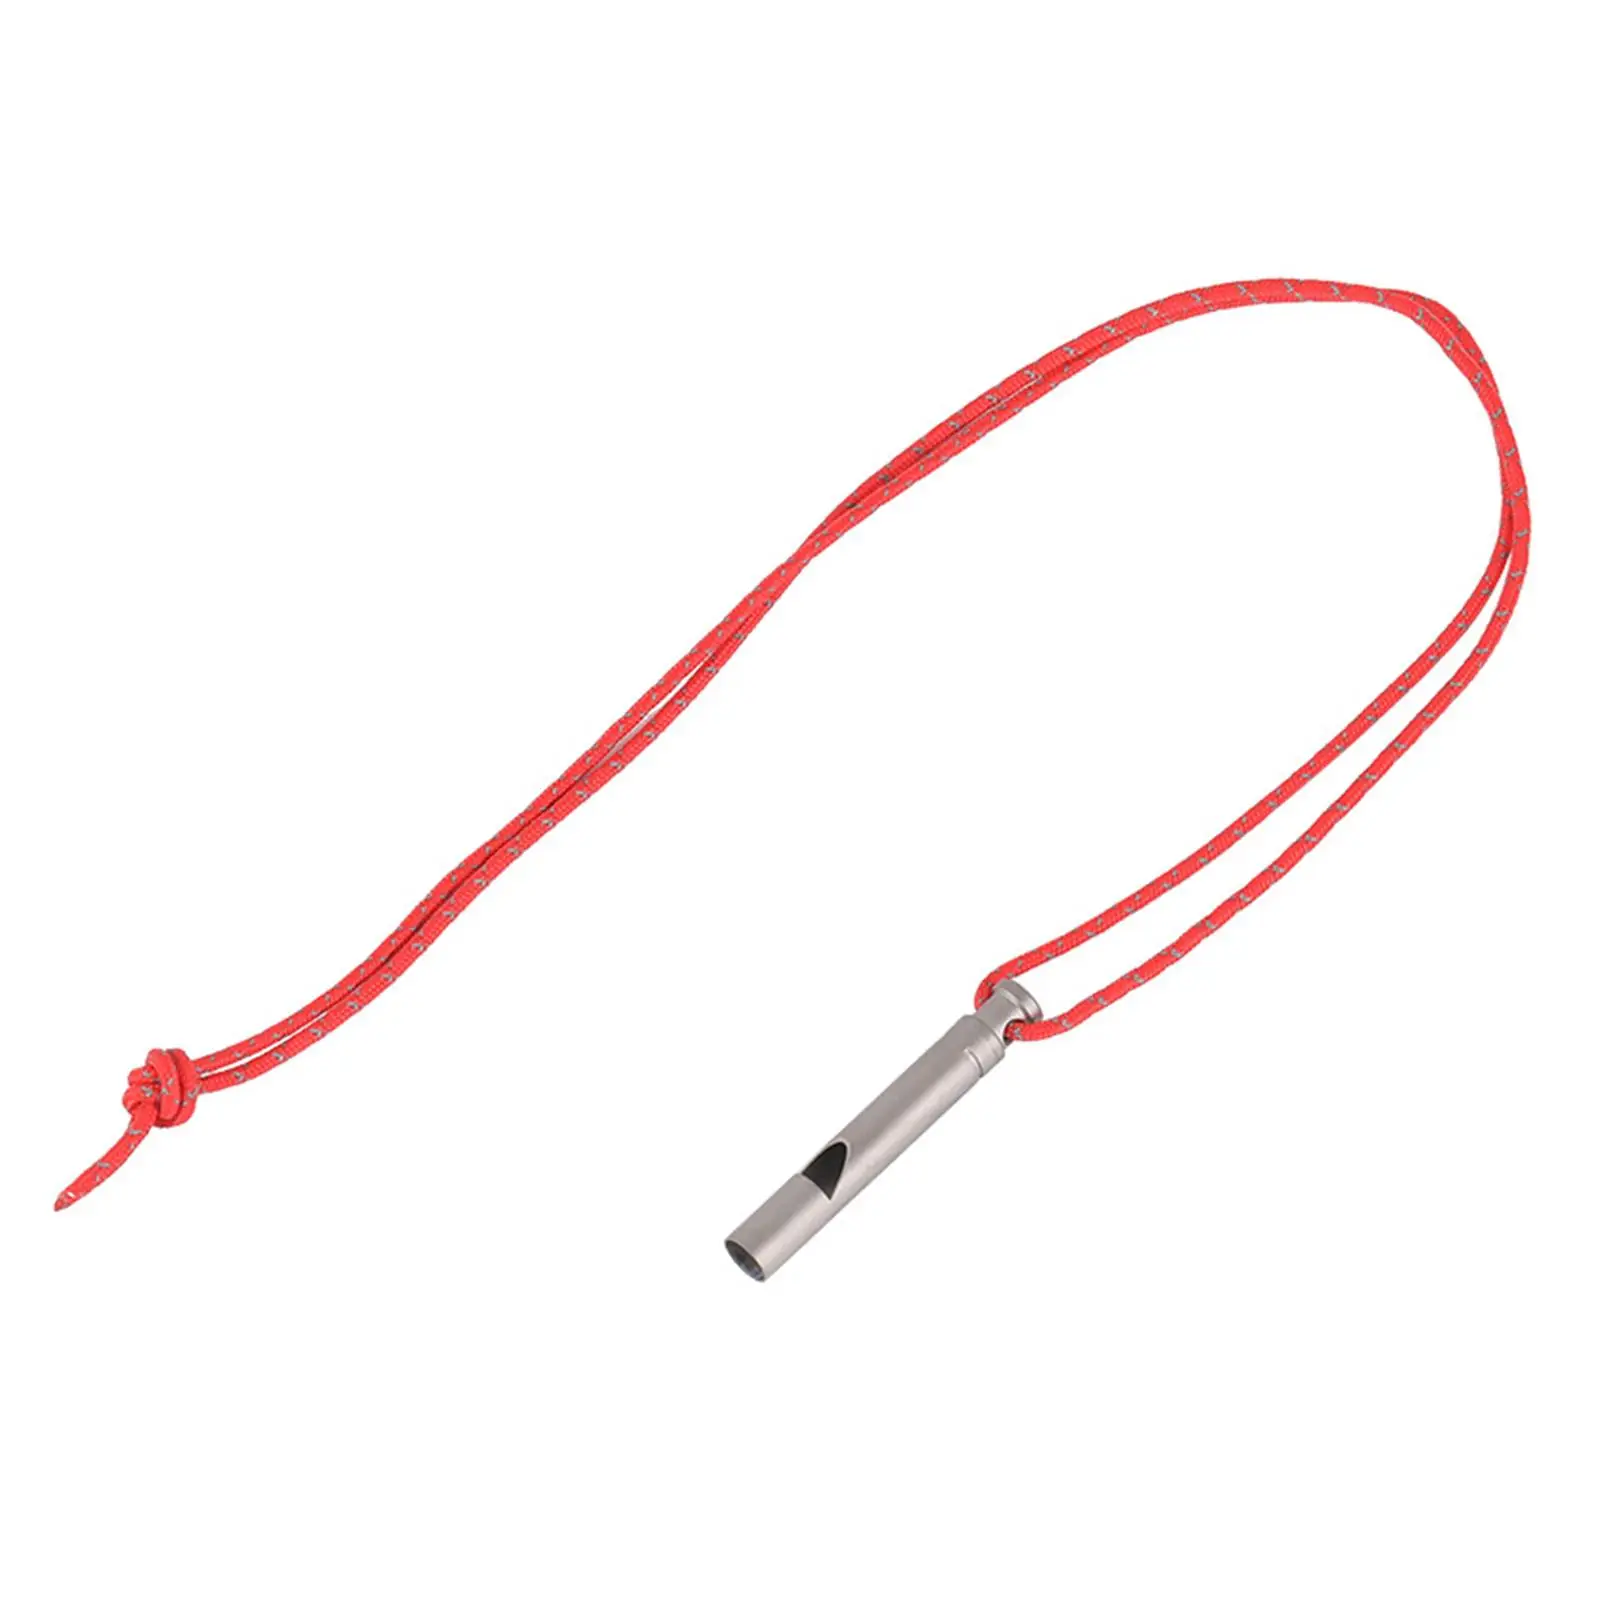 Loud Titanium Emergency Whistle with Cord Equipment for Hiking Exploring